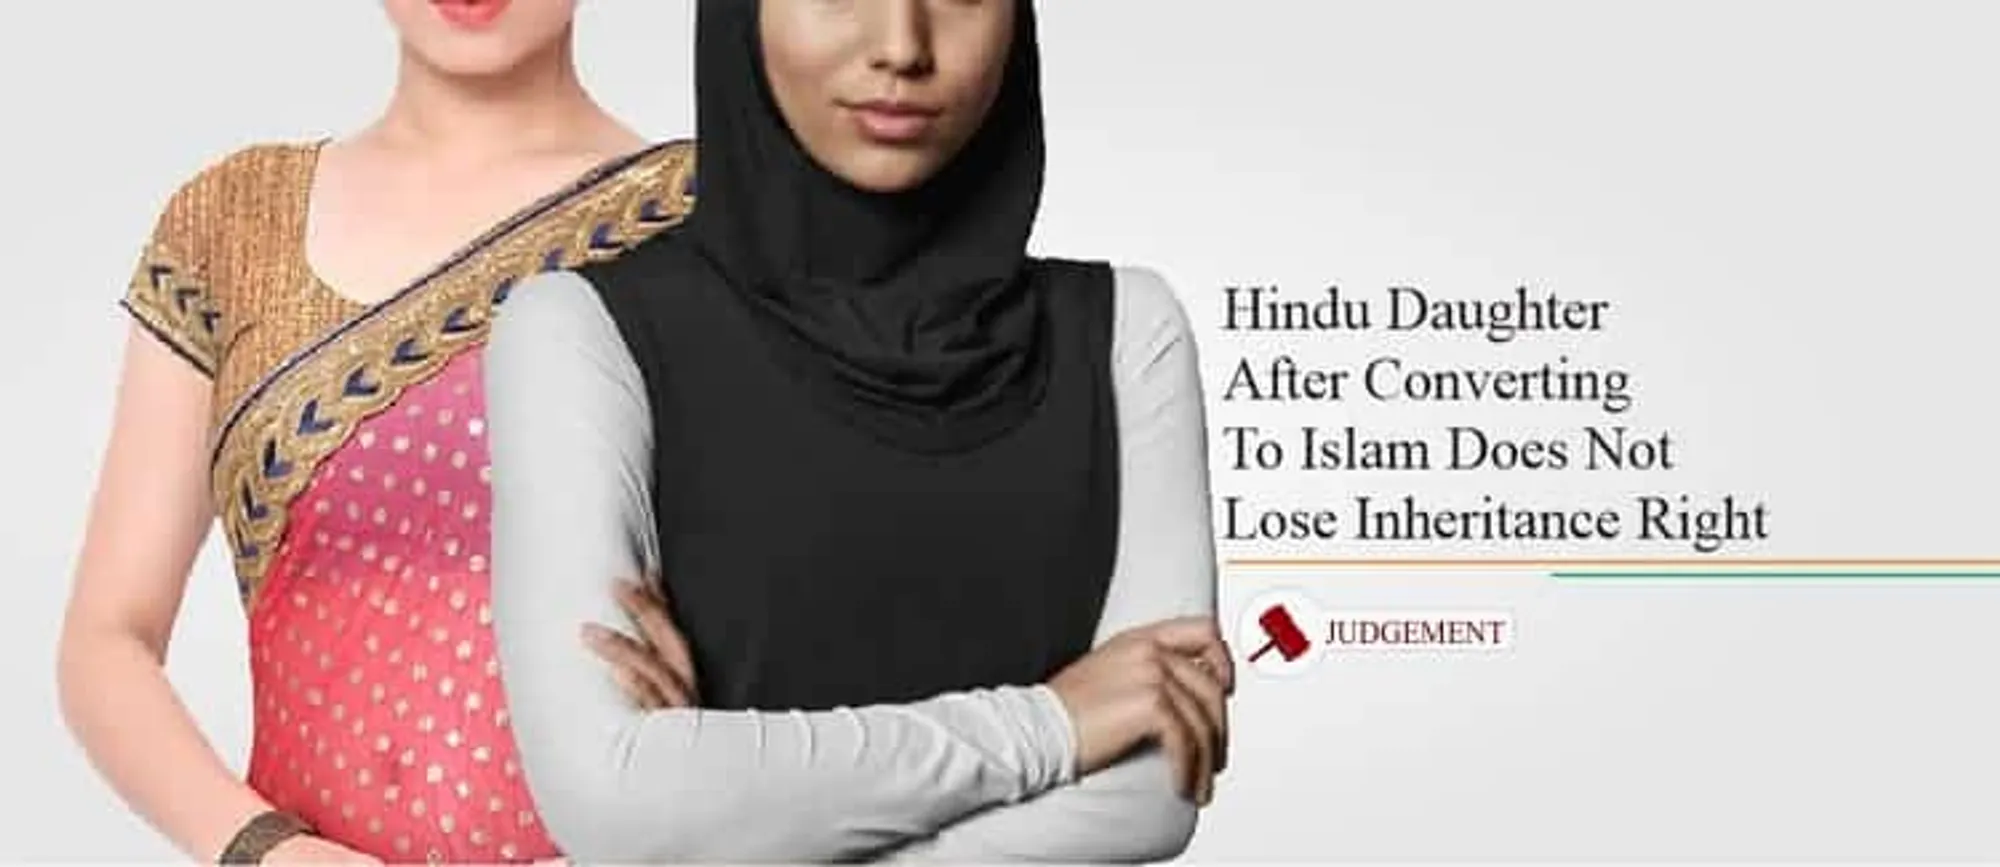 Hindu Daughter After Converting To Islam Does Not Lose Inheritance Right